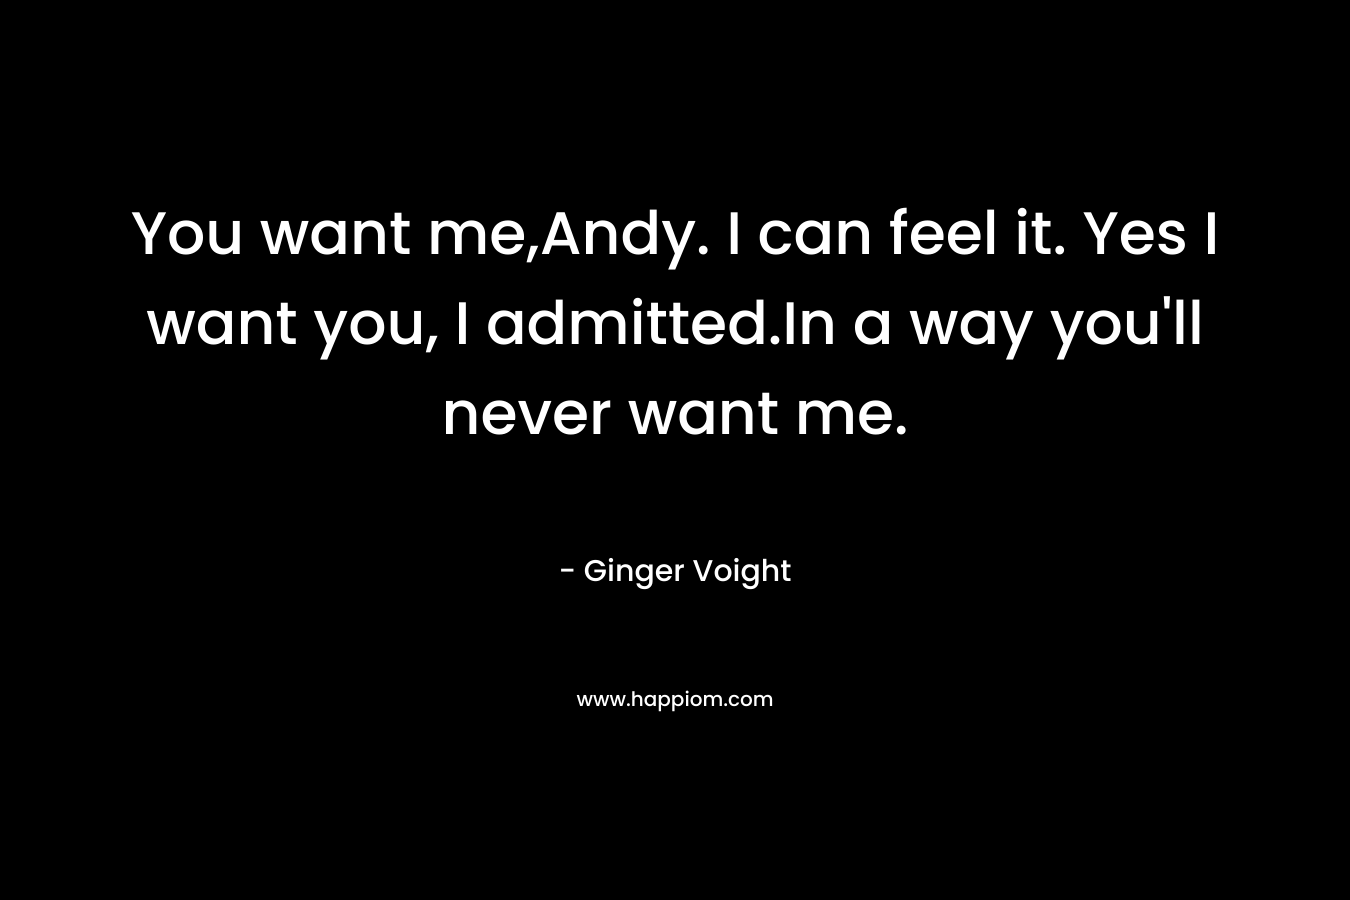 You want me,Andy. I can feel it. Yes I want you, I admitted.In a way you’ll never want me. – Ginger Voight